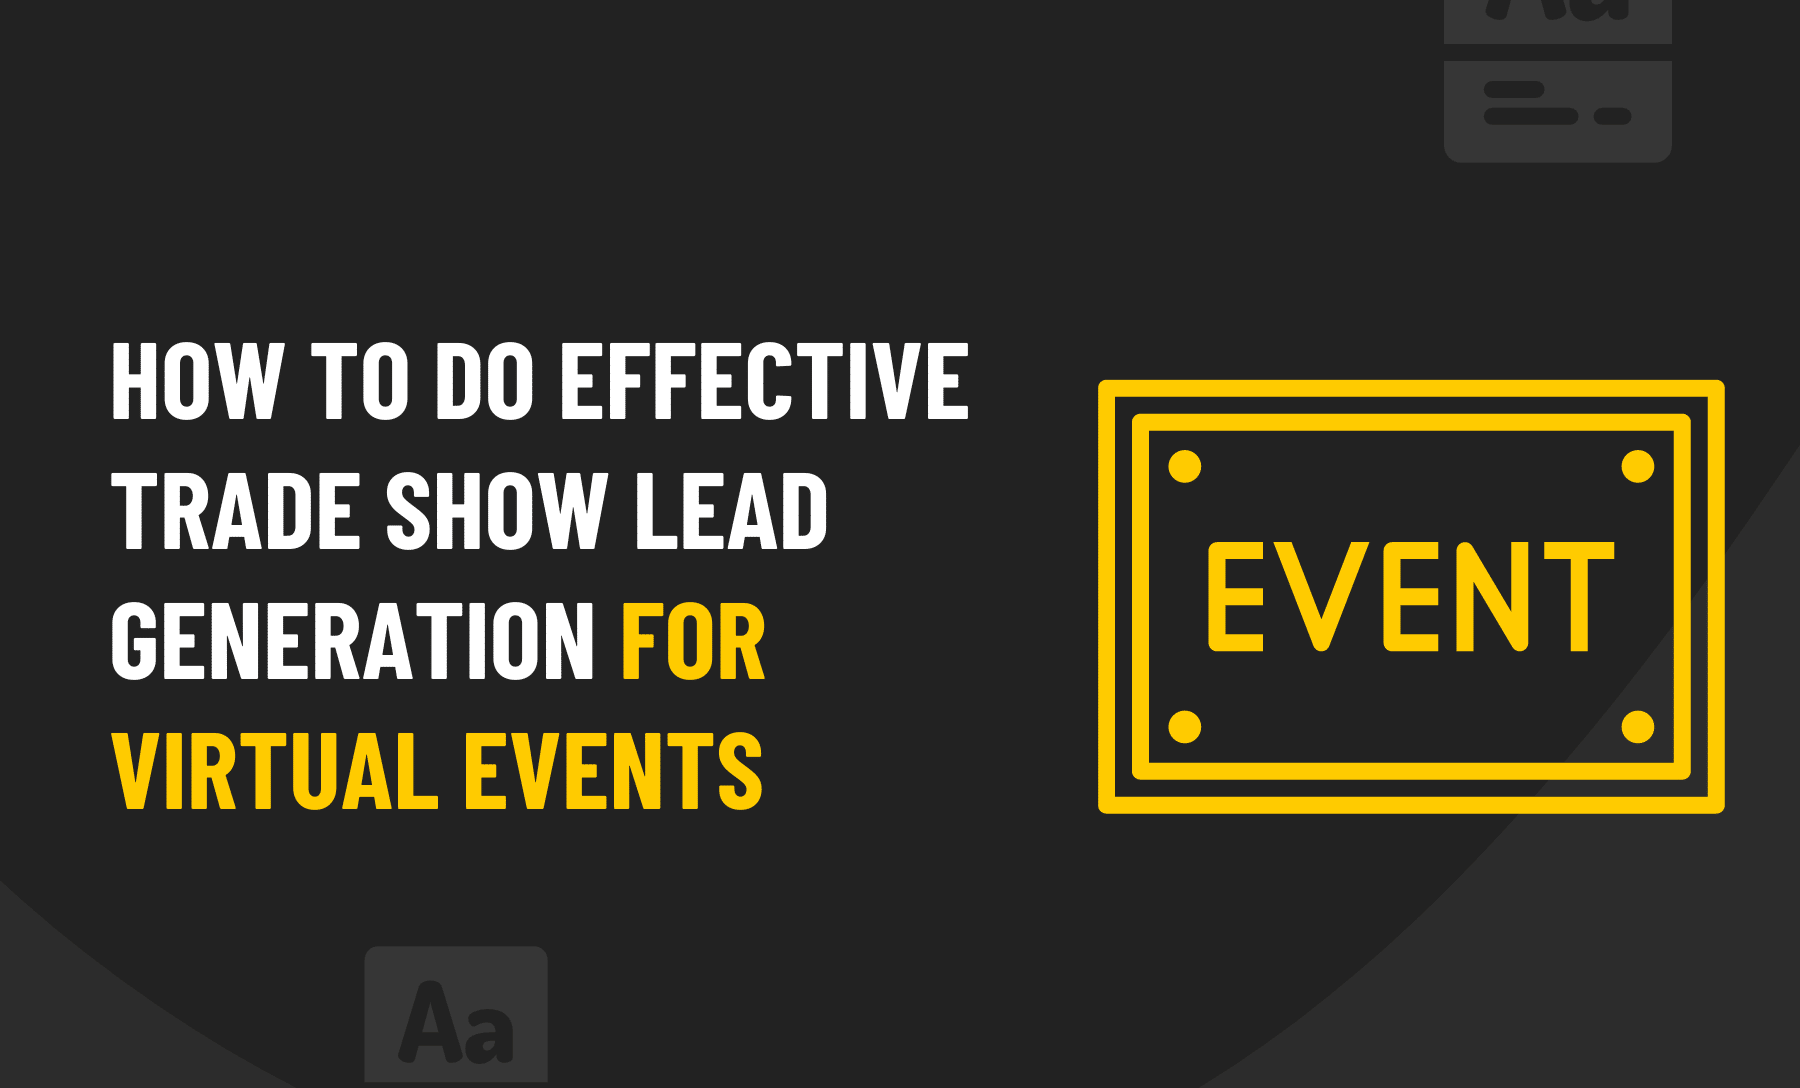 Lead Generation For Virtual Events